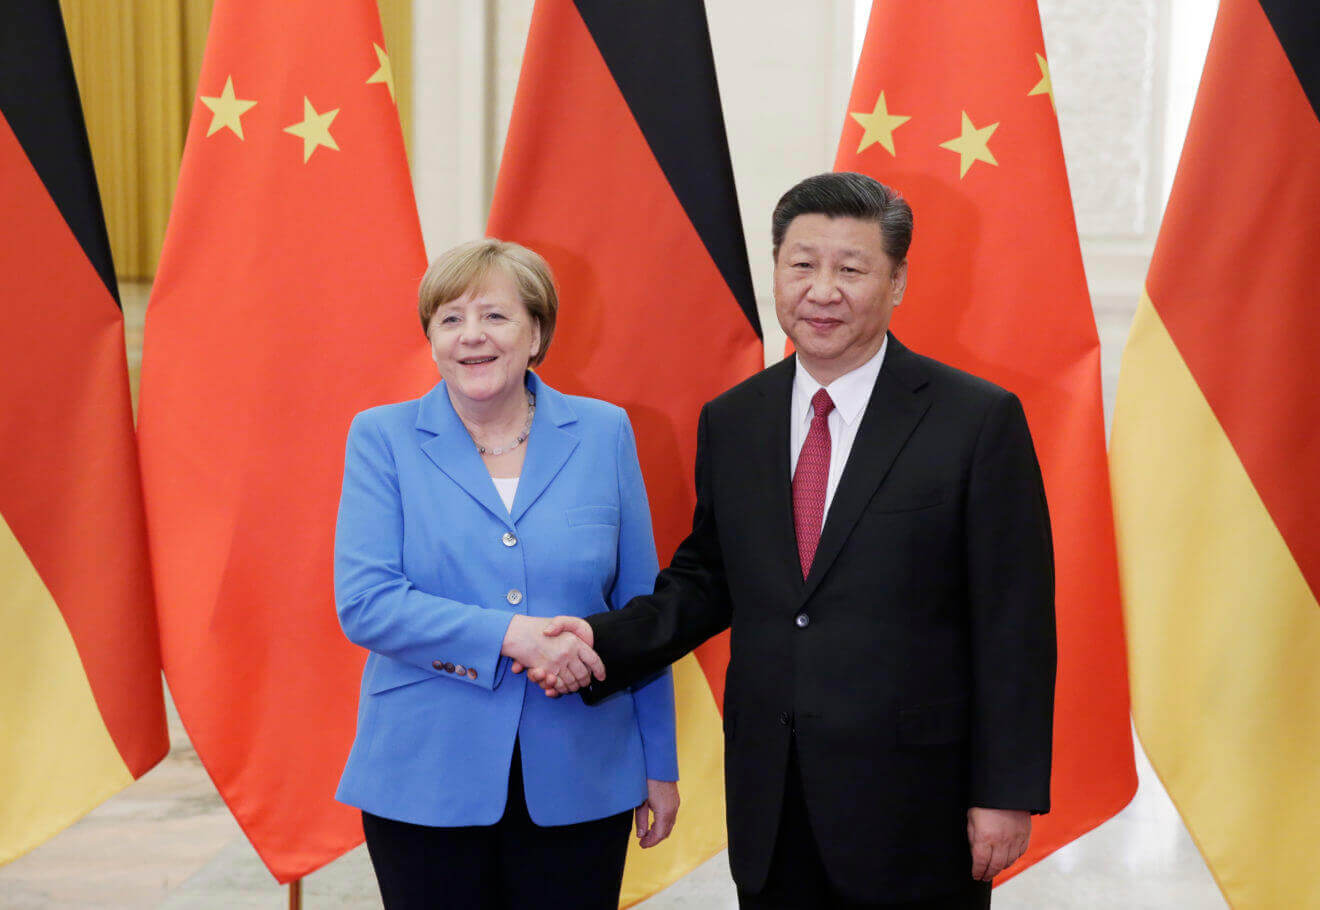 Merkel Discusses Bilateral Ties and Global Challenges with Xi in Farewell Call